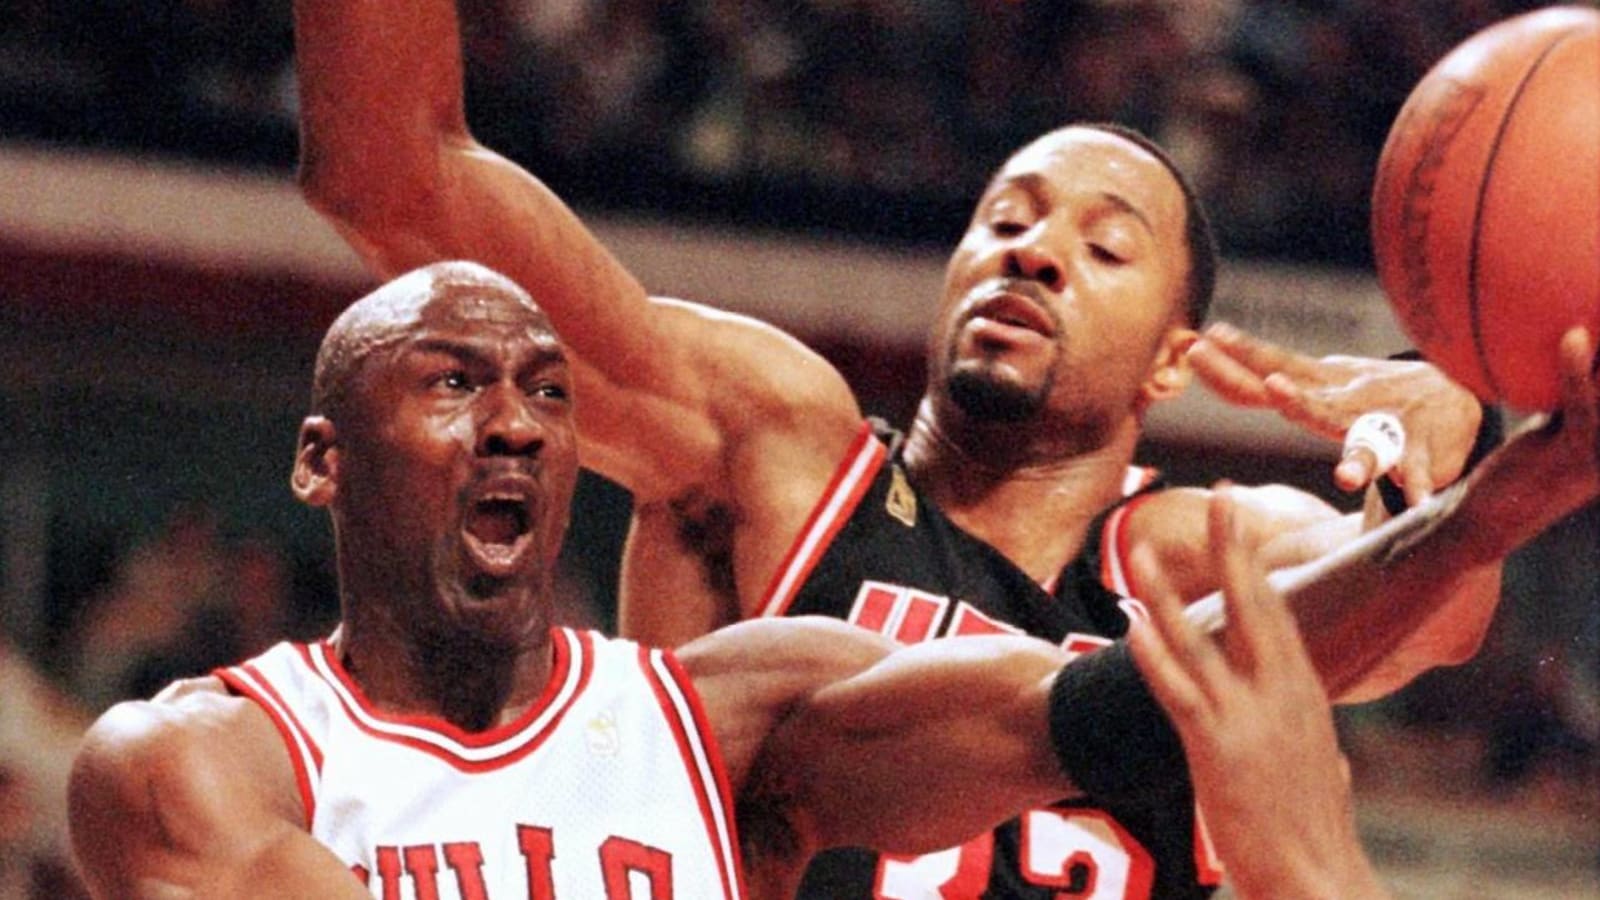 May 22 in sports history: In ugly playoff game, MJ was lousy